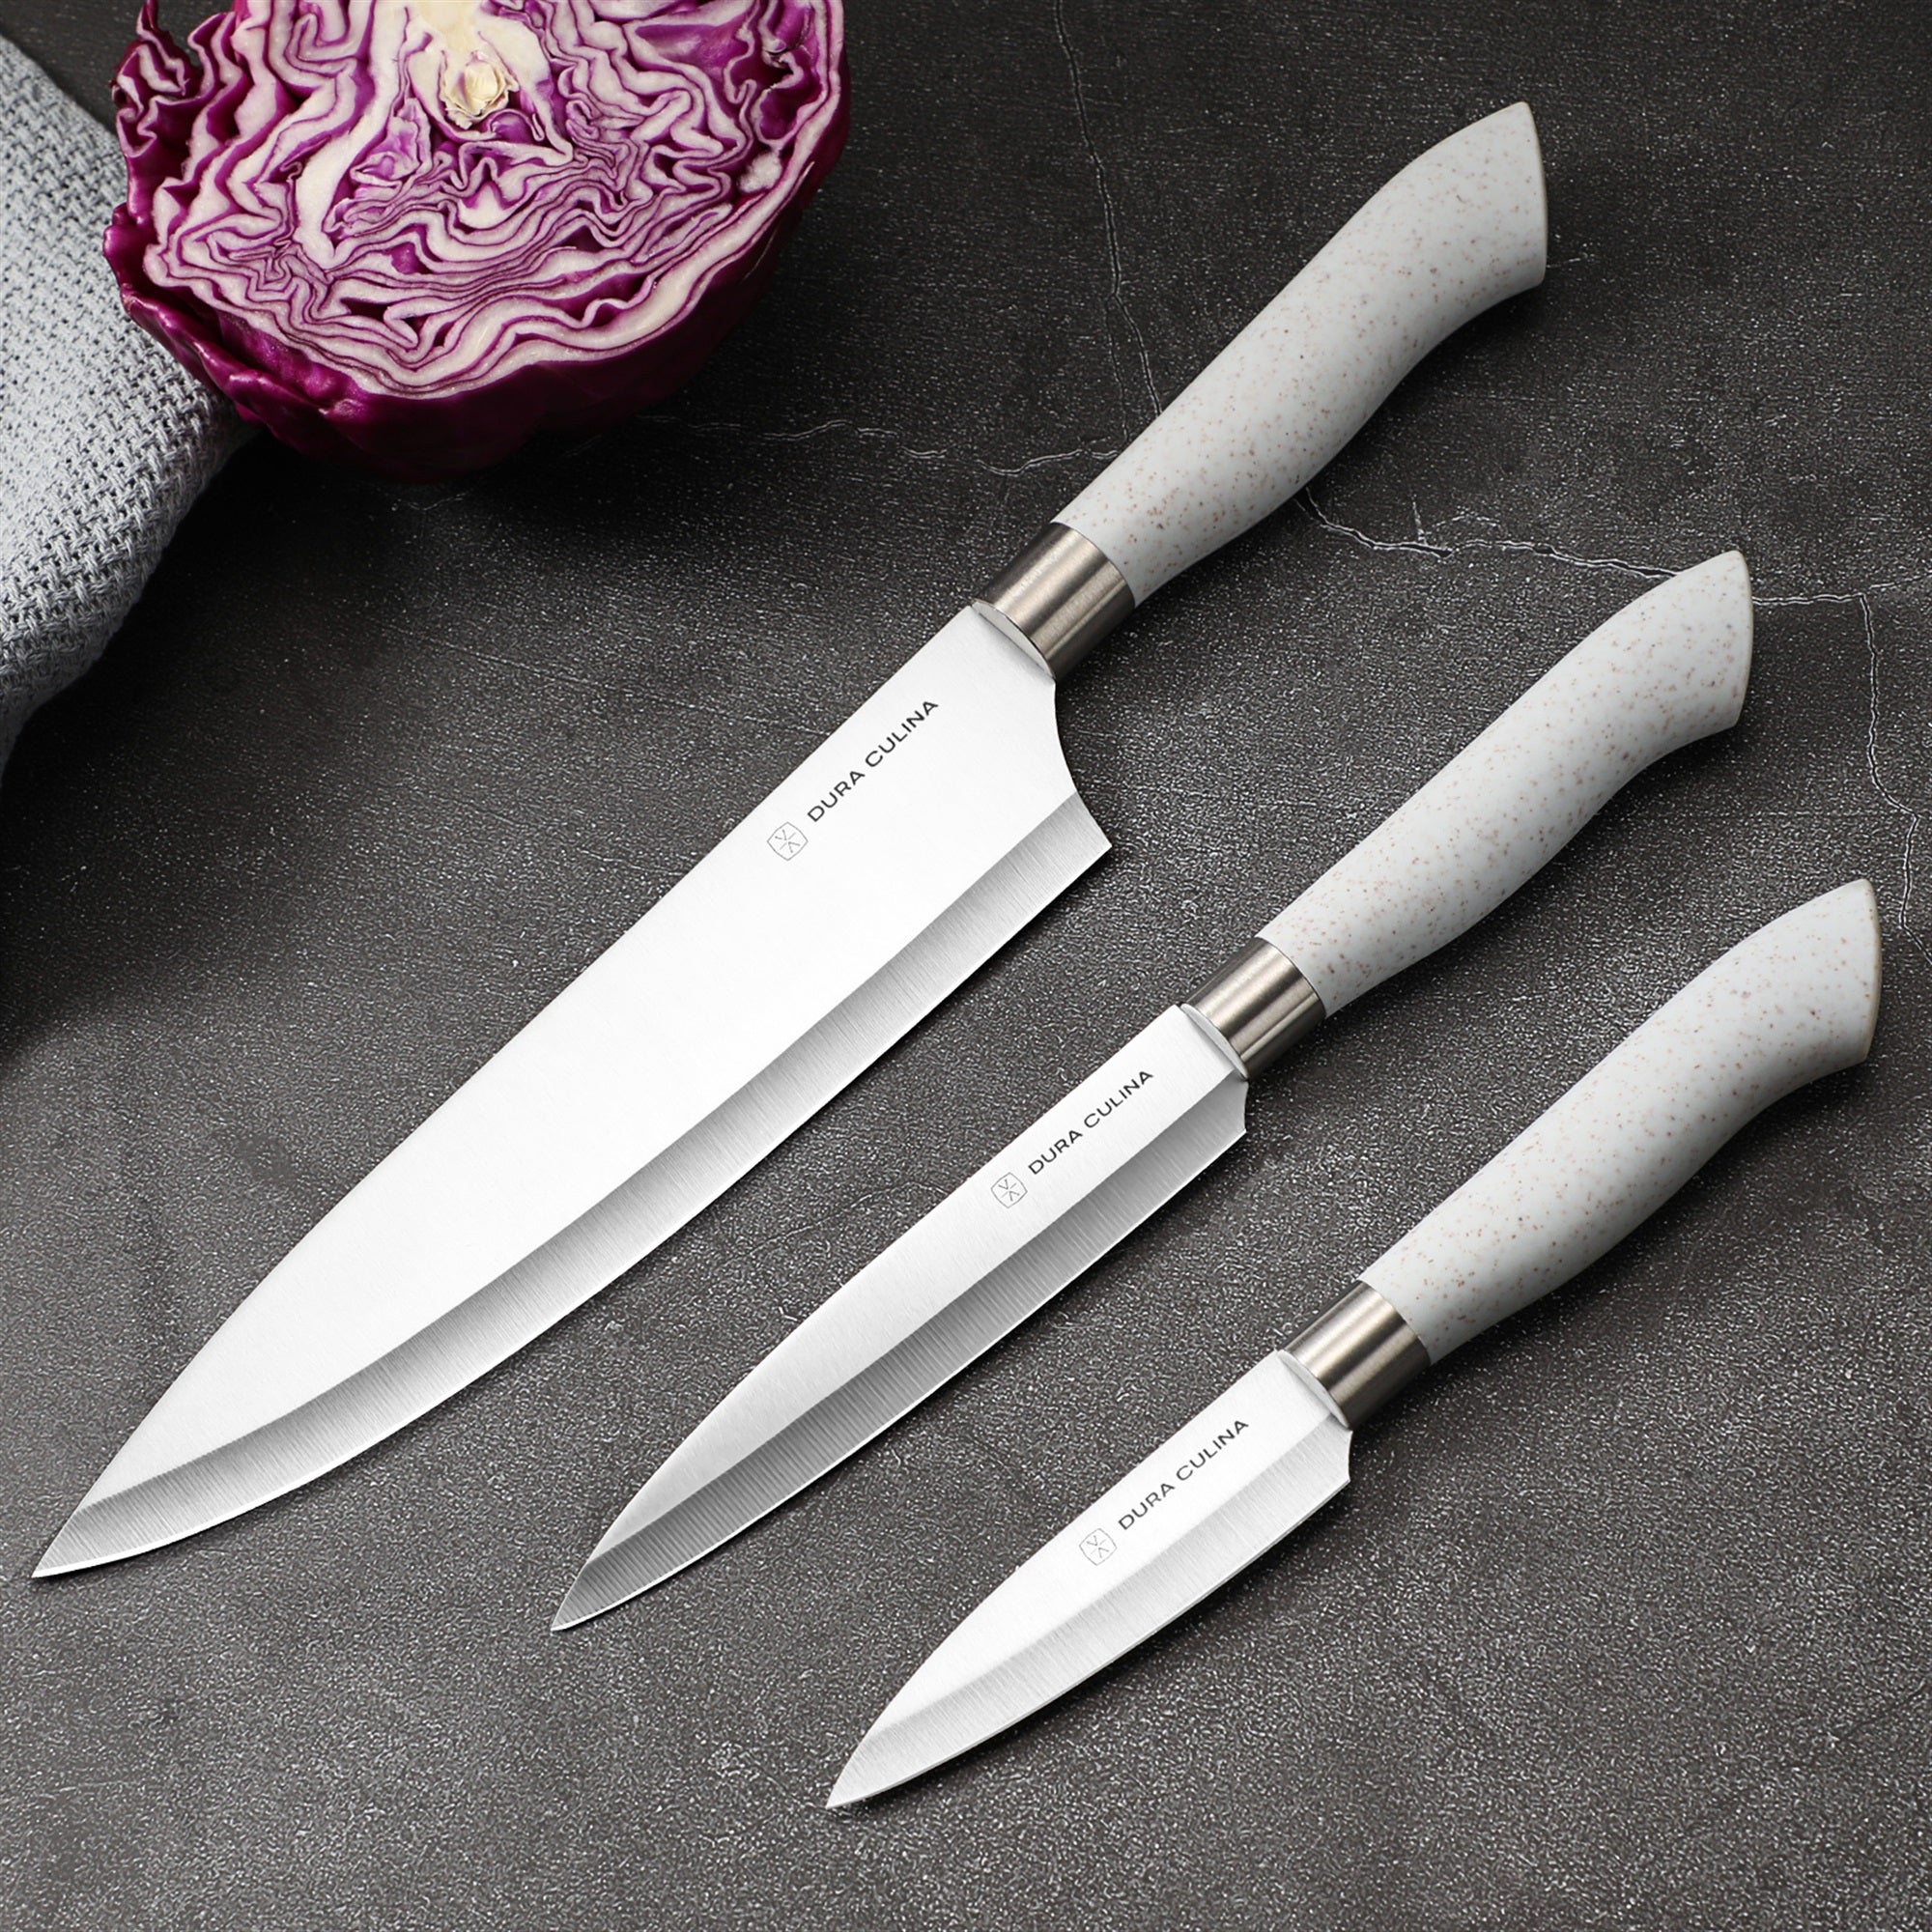 Dura Living EcoCut 3-Piece Kitchen Knife Set - High Carbon Stainless Steel Blades, Sustainable Ergonomic Handles, Eco-Friendly Knives with Sheaths